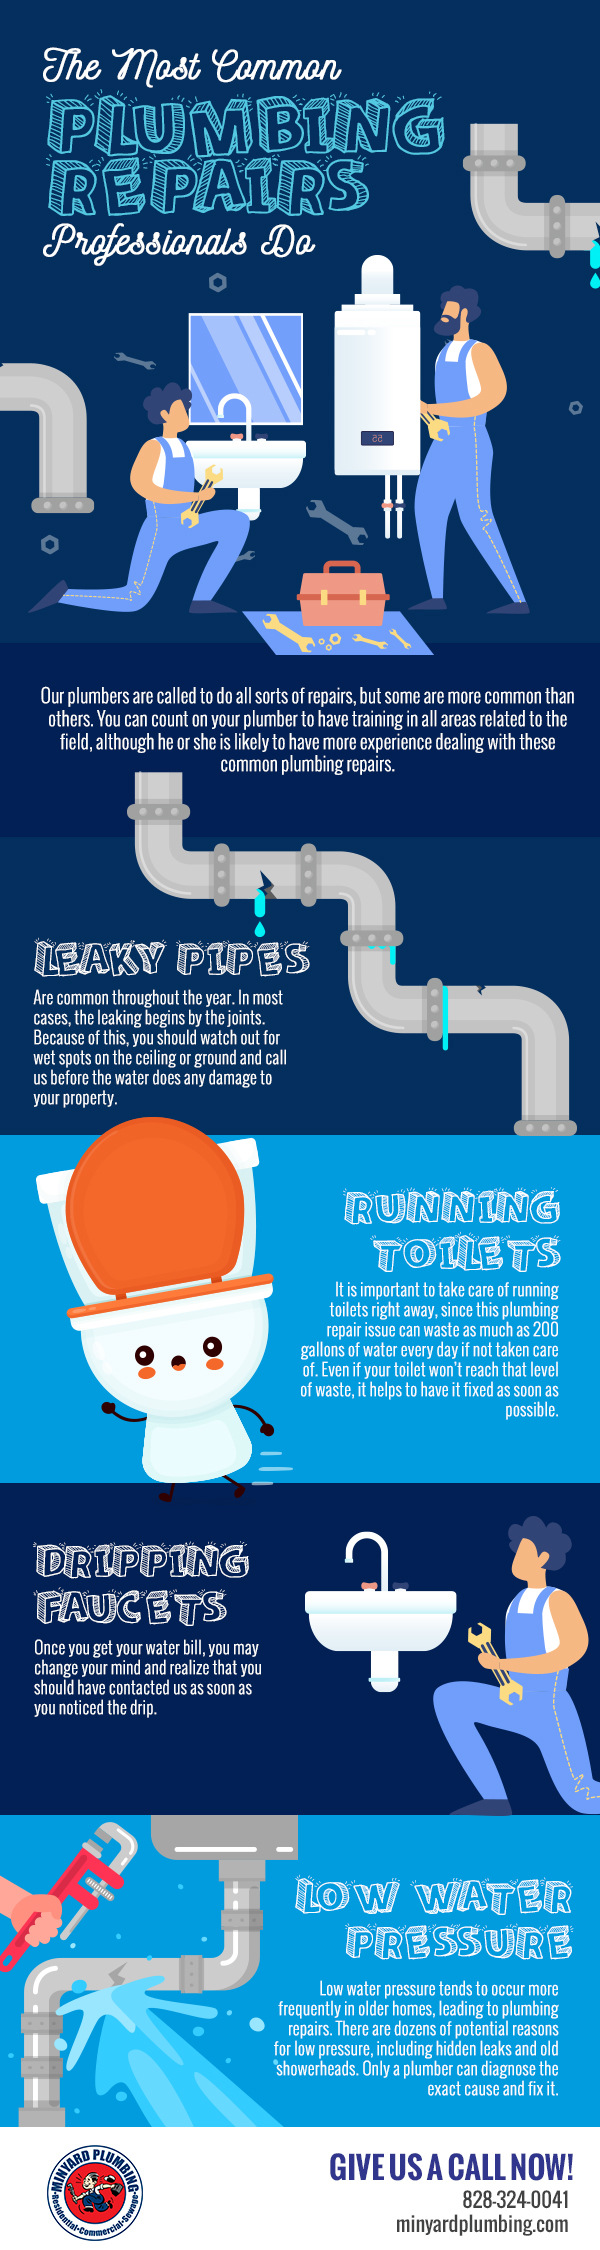 The Most Common Plumbing Repairs Professionals Do